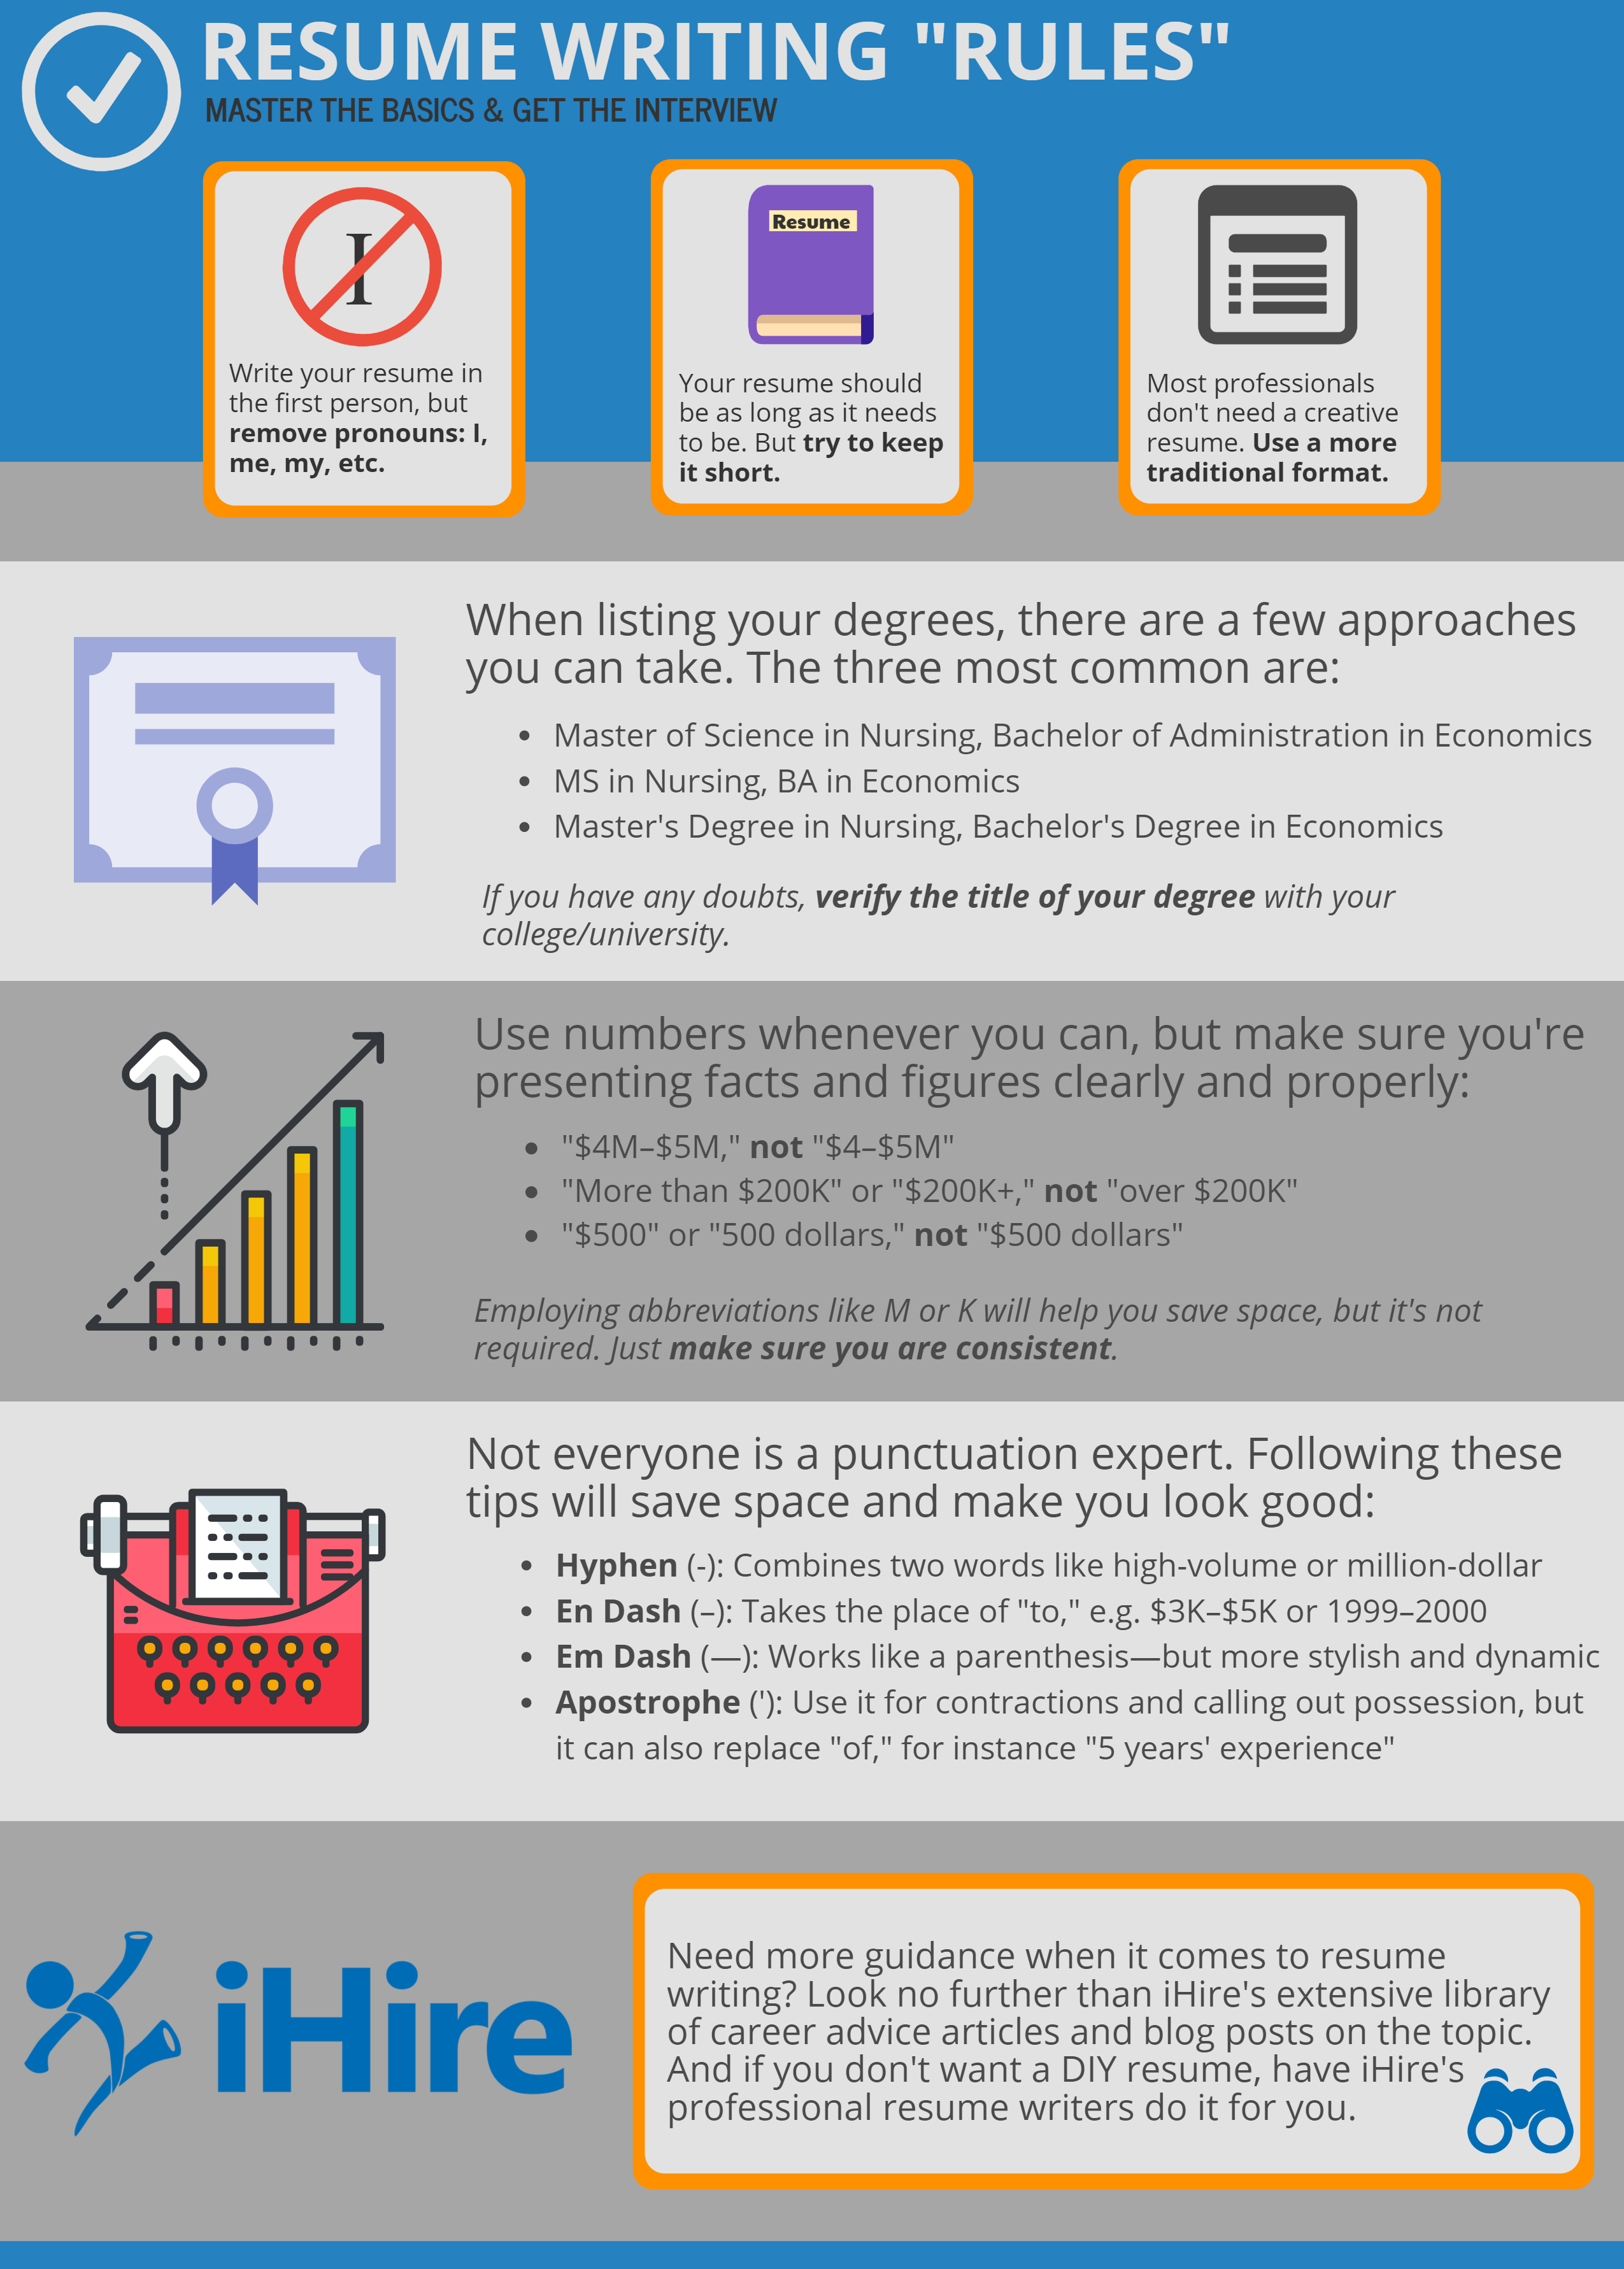 Resume writing rules infographic